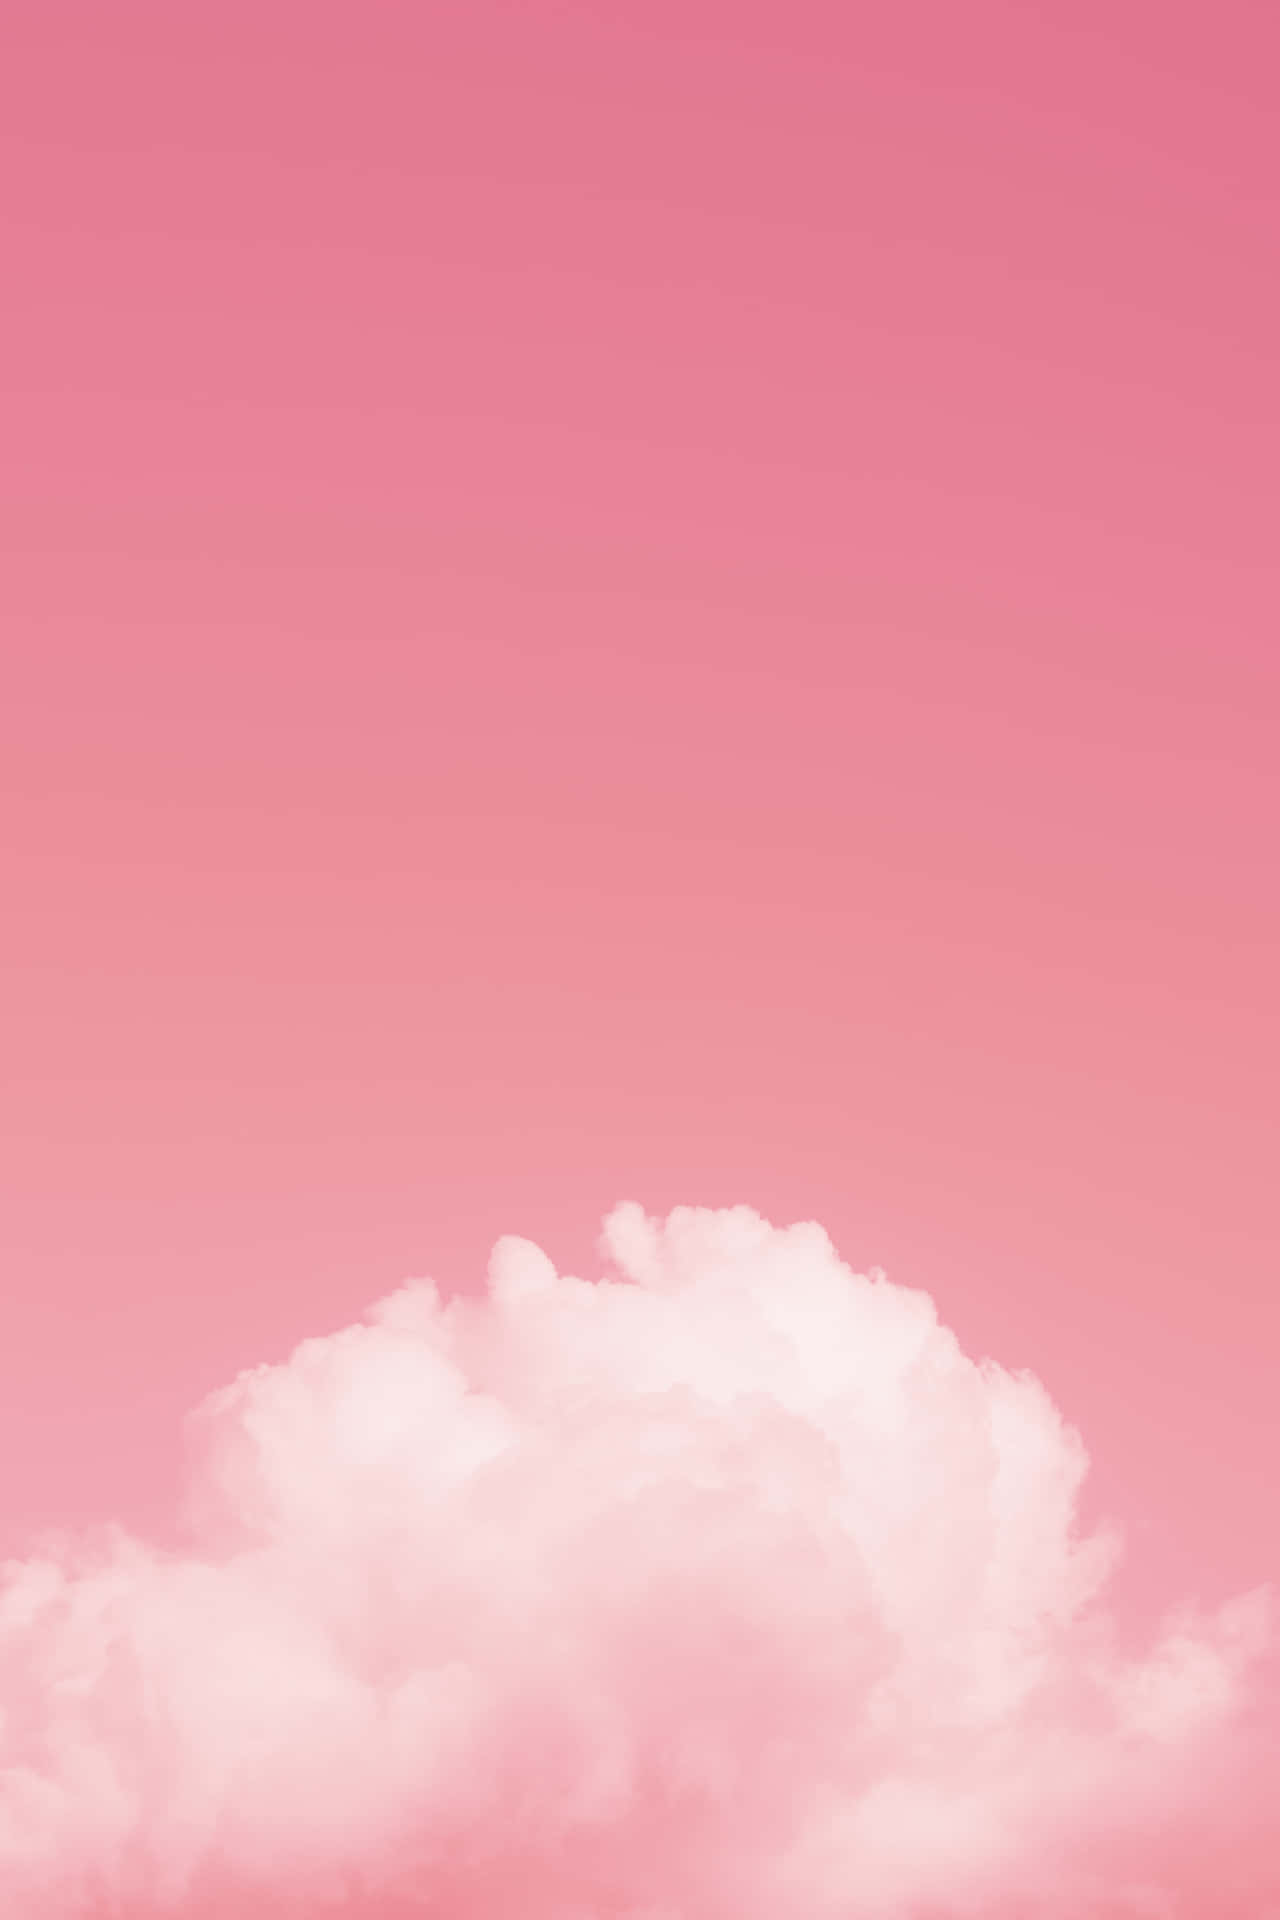 Rosa sky wallpaper - wallpapers for android Wallpaper